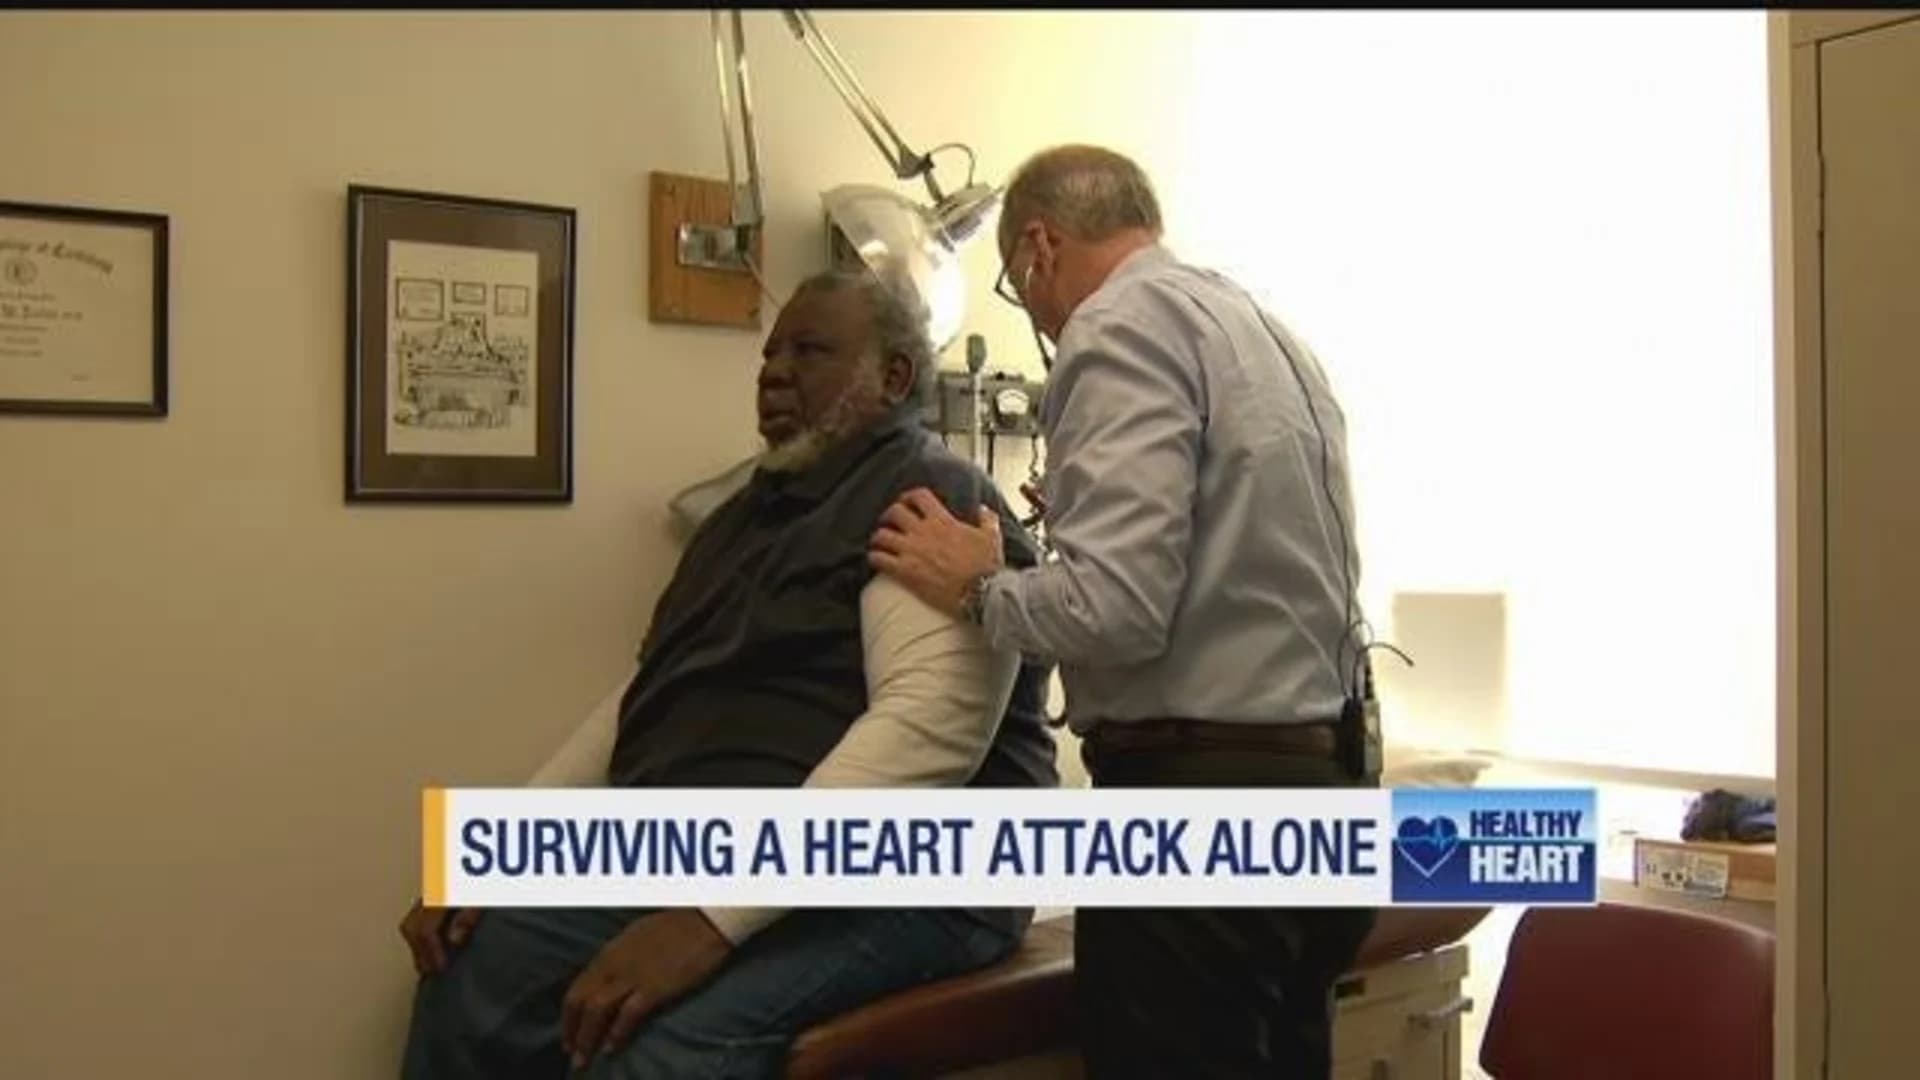 Healthy Heart: Dealing with heart attack symptoms